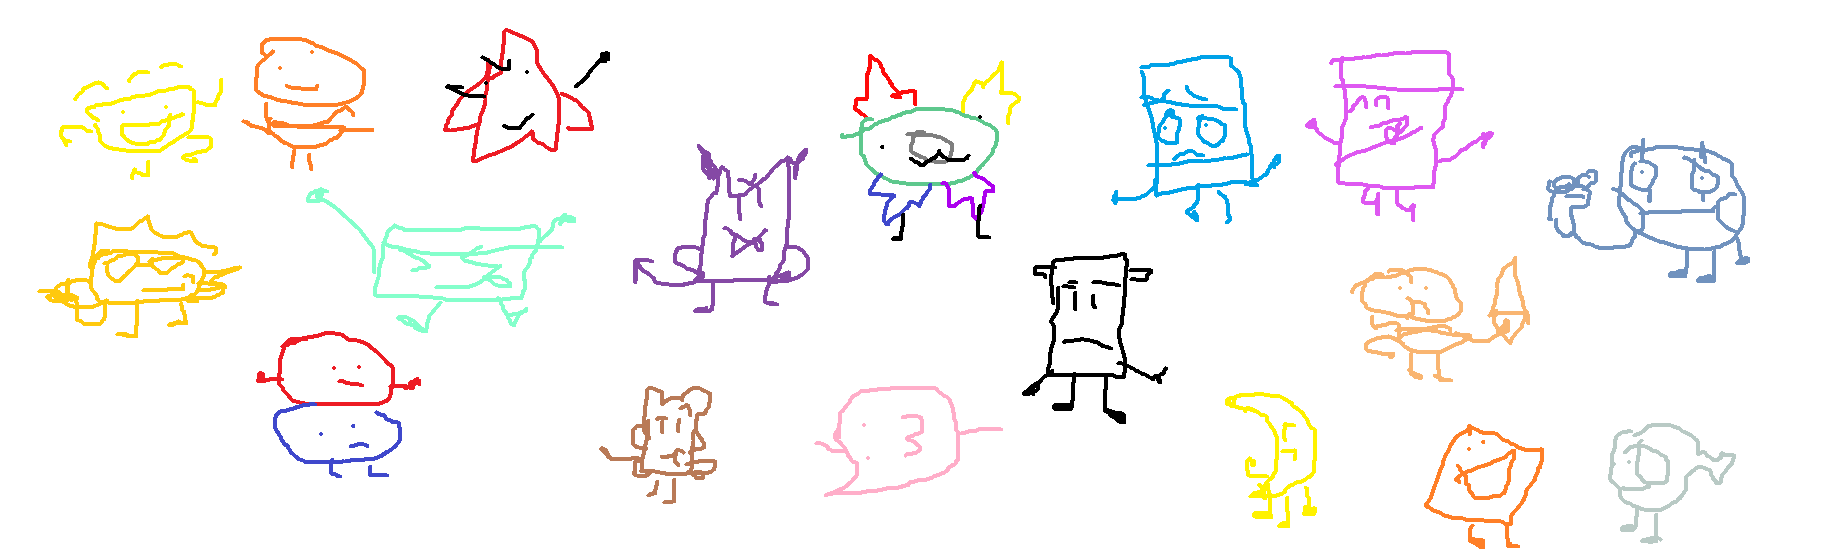 Badly Drawn Game Characters